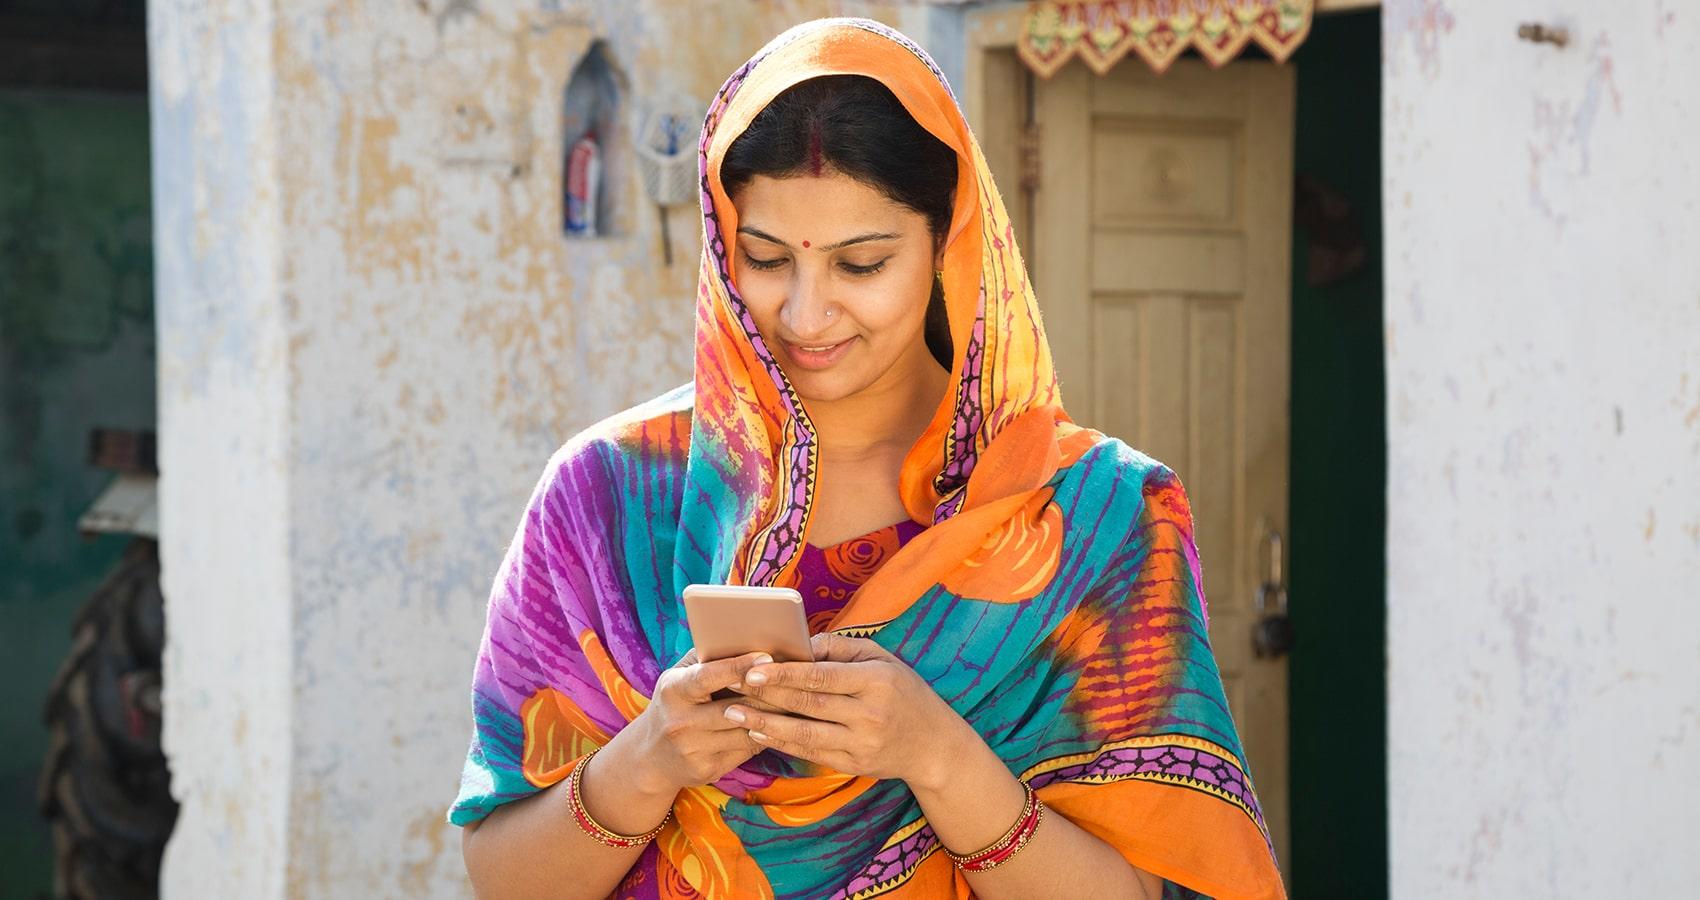 image of Indian woman on cell phone